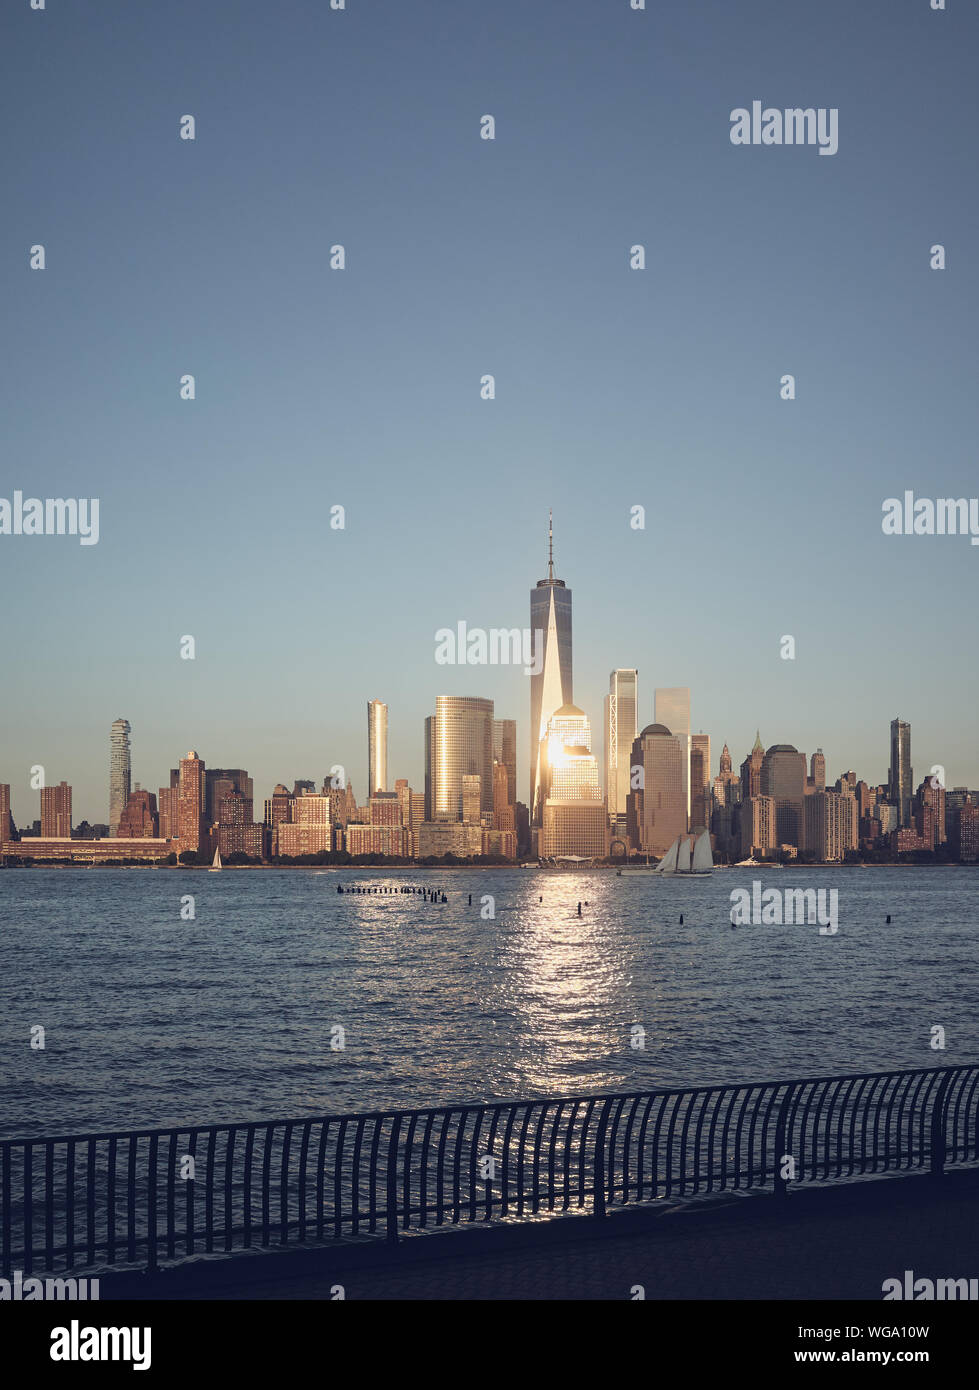 Manhattan skyline at sunset, color toning applied, New York City, USA. Stock Photo